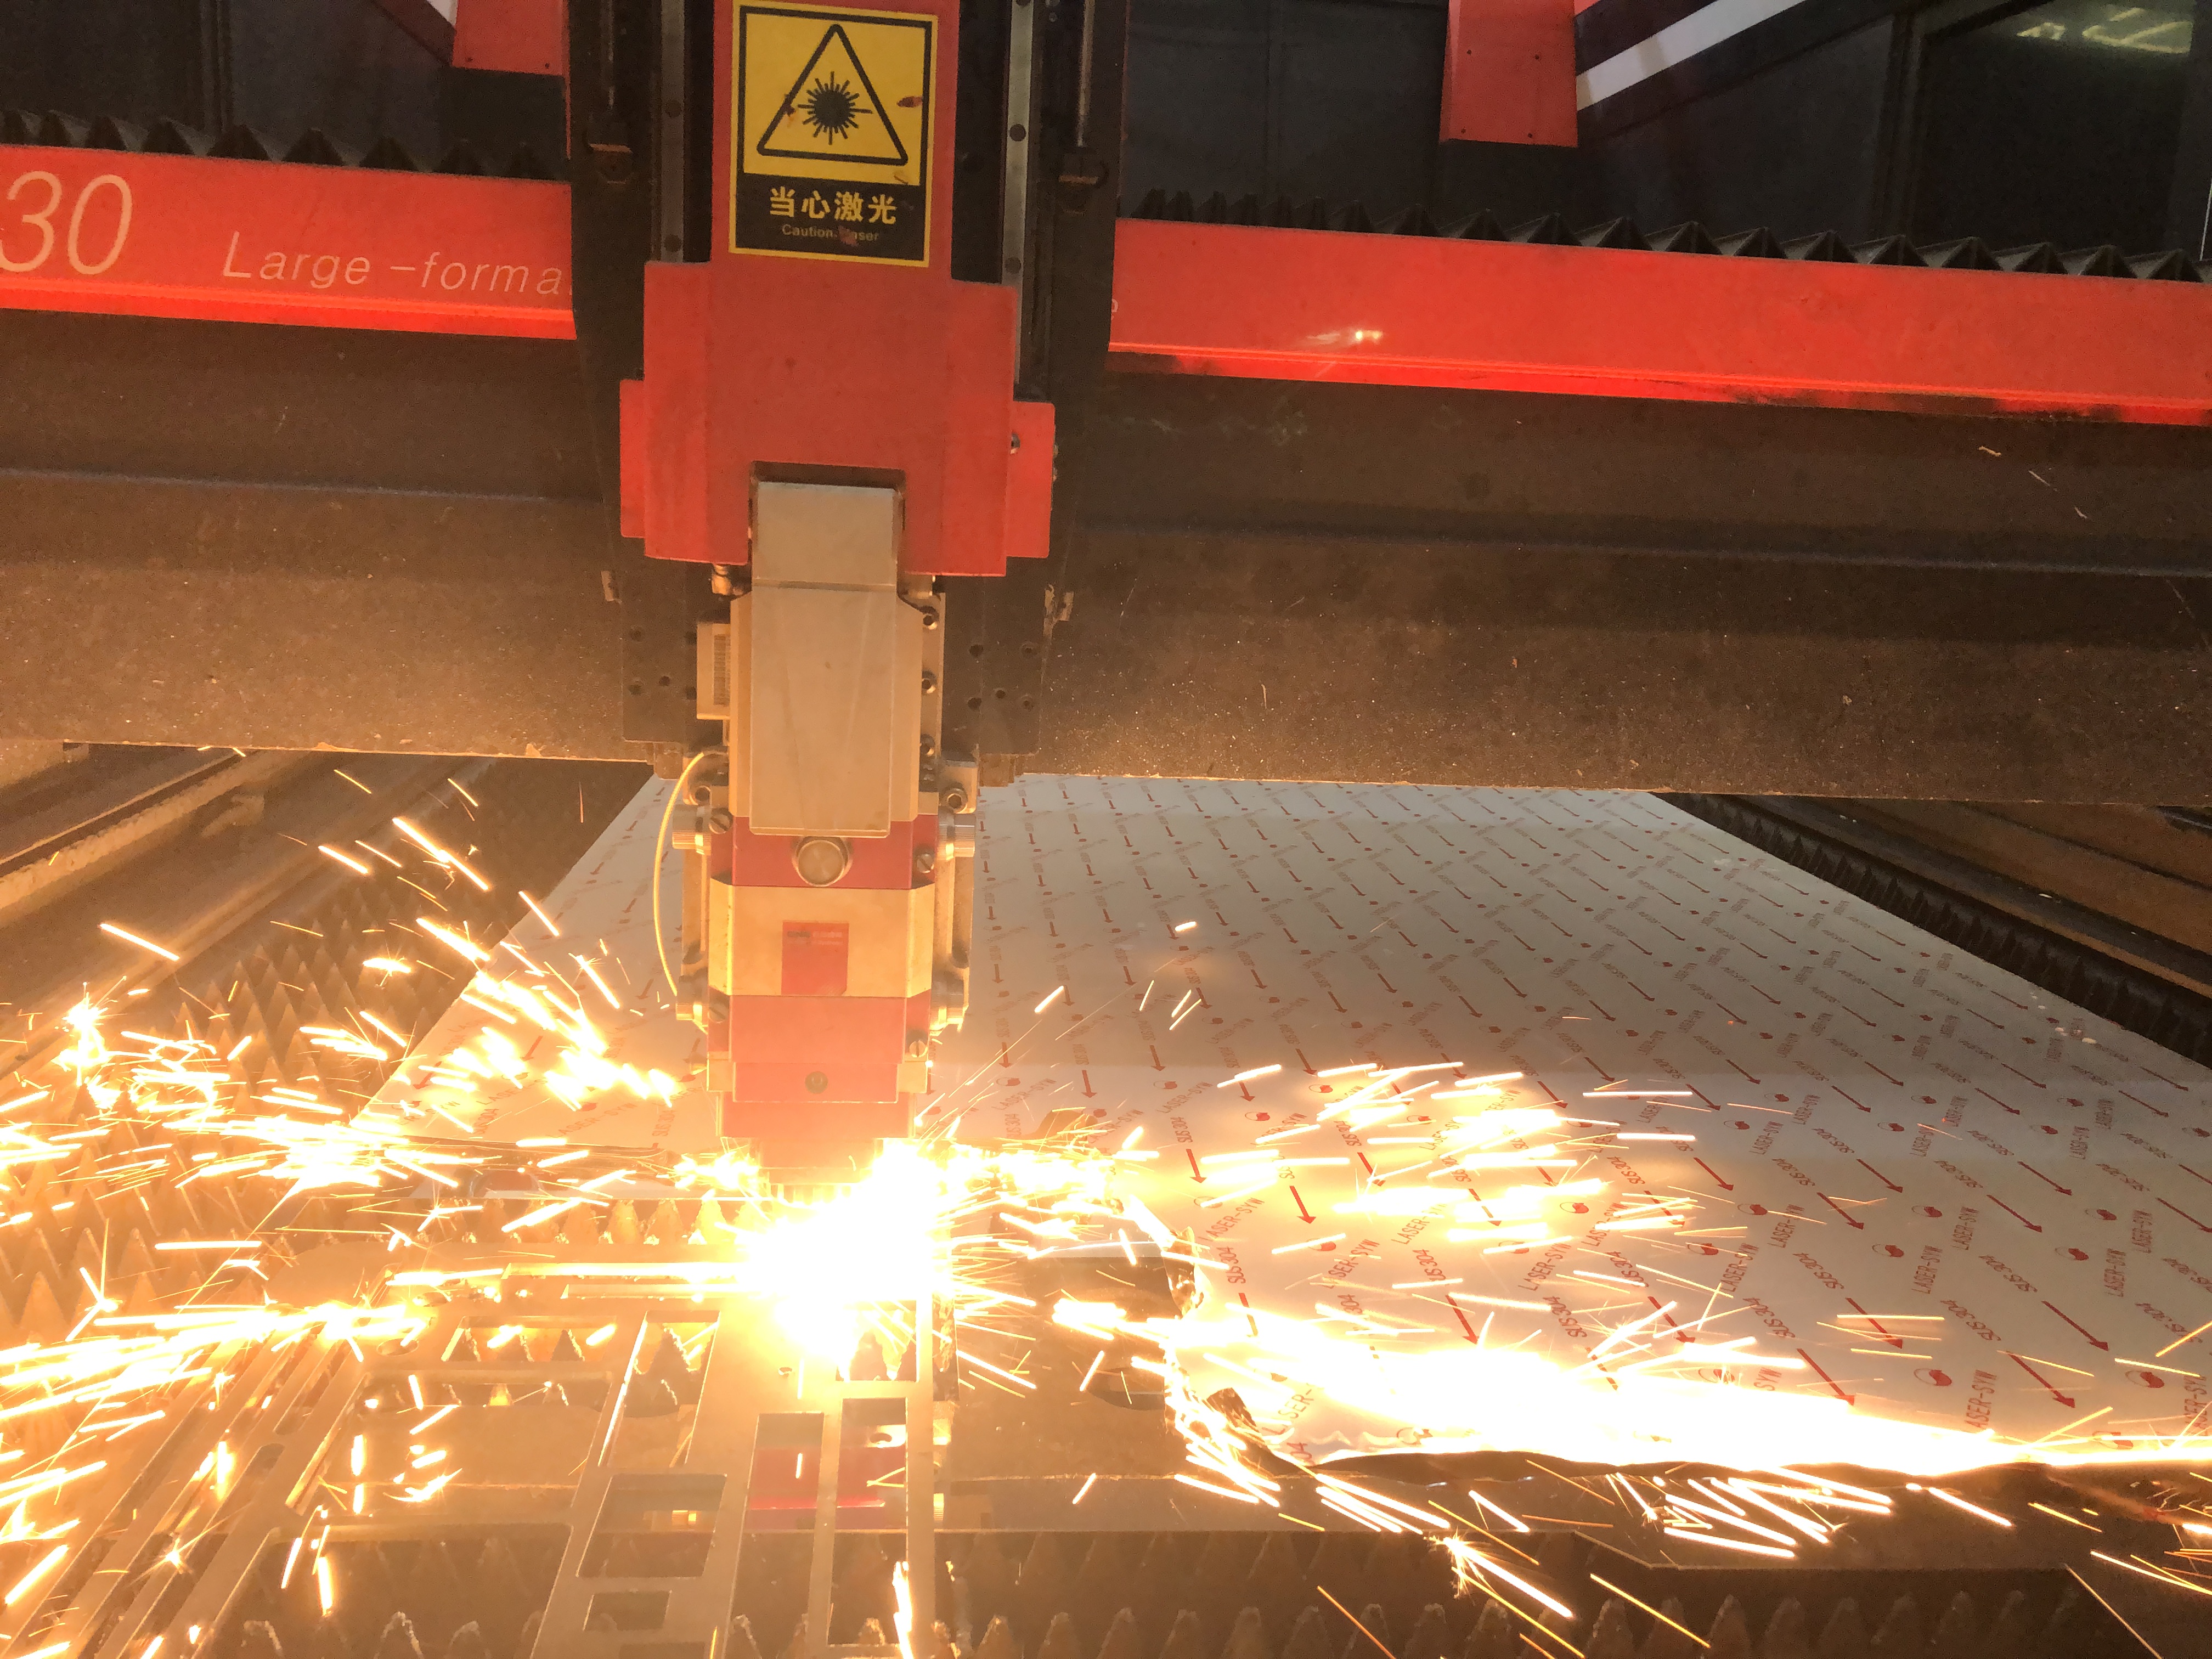 Precision metal cutting processes including Laser cutting, Chemical etching and Water Jet